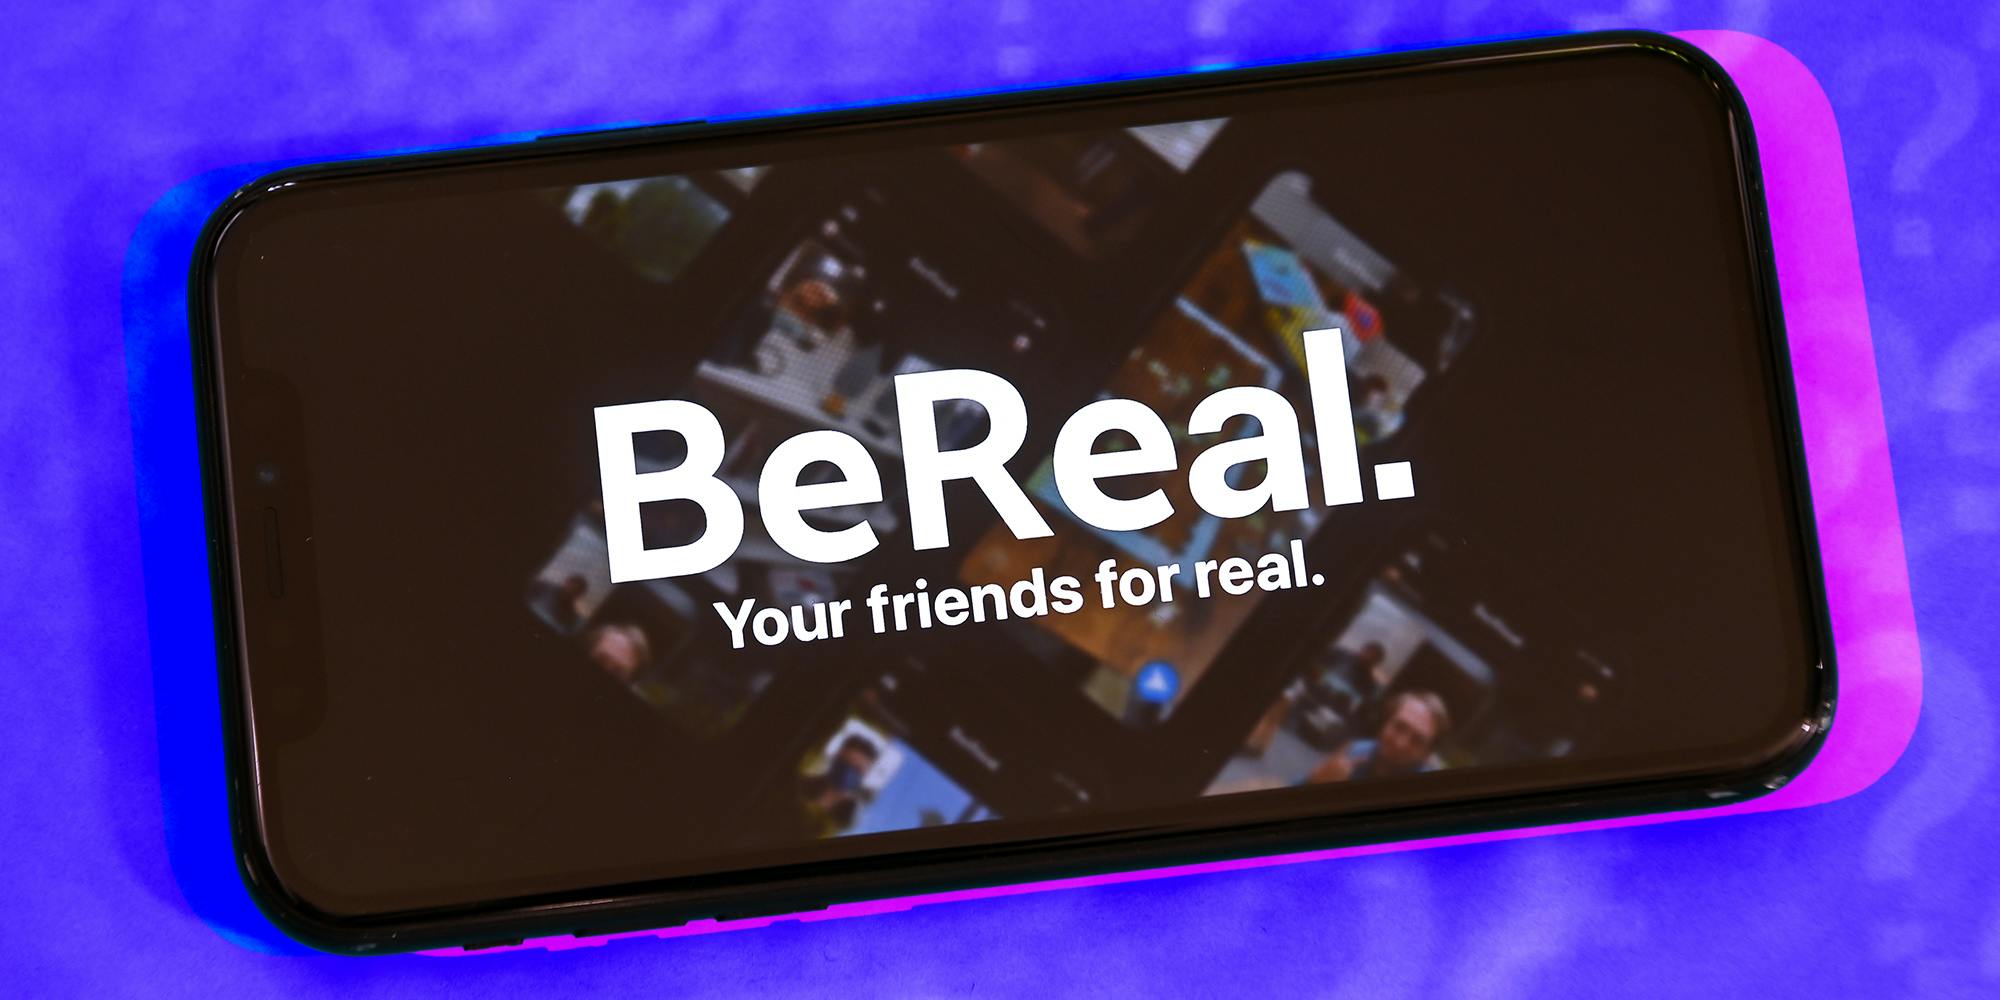 The BeReal app logo on a smartphone screen realpeople